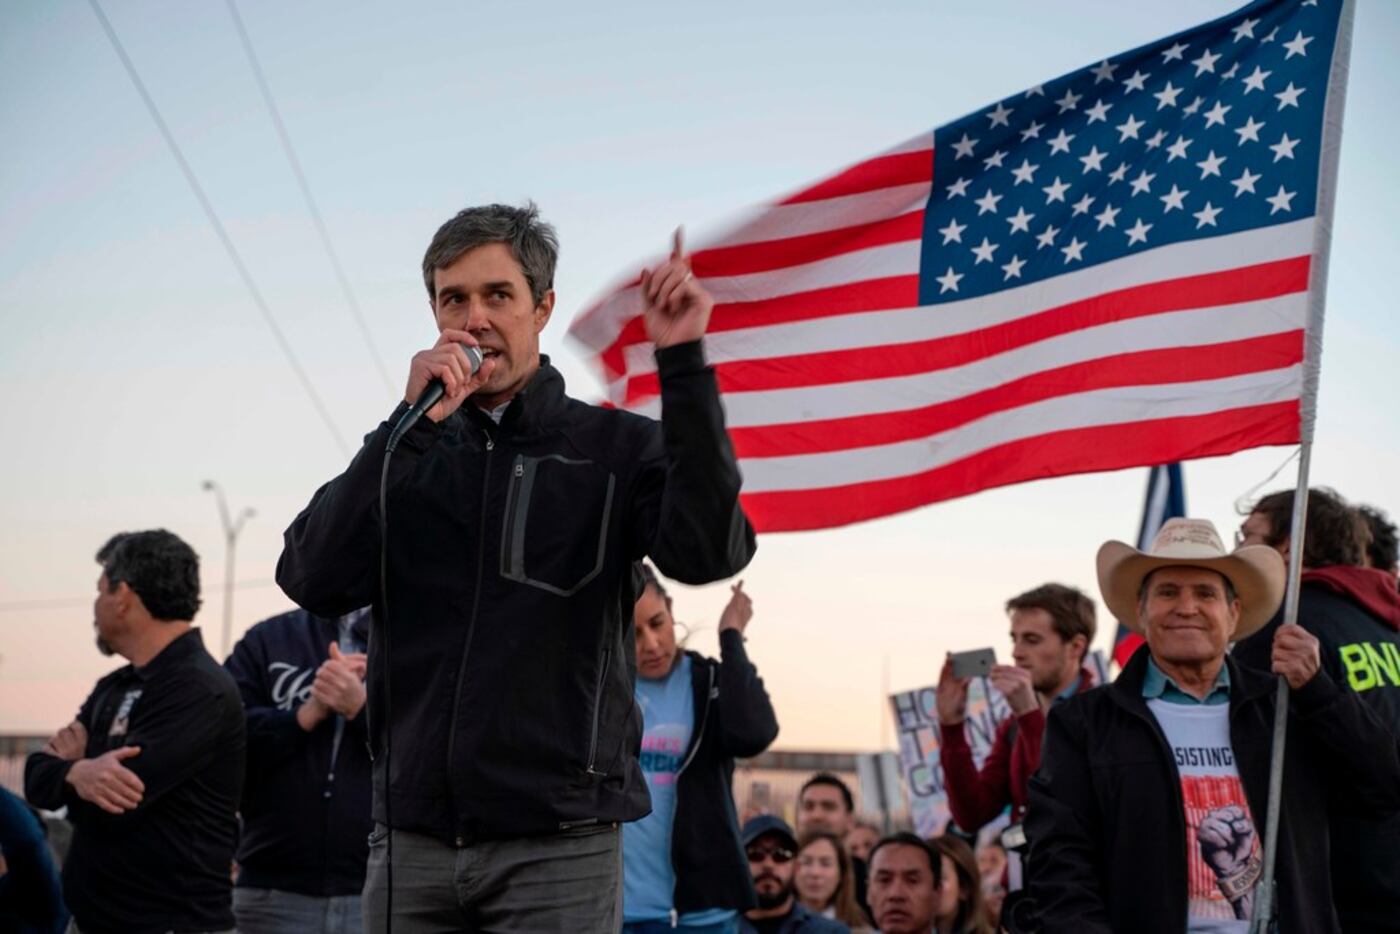 Former Texas Congressman Beto O'Rourke speaks to a crowd of marchers during the "March for...